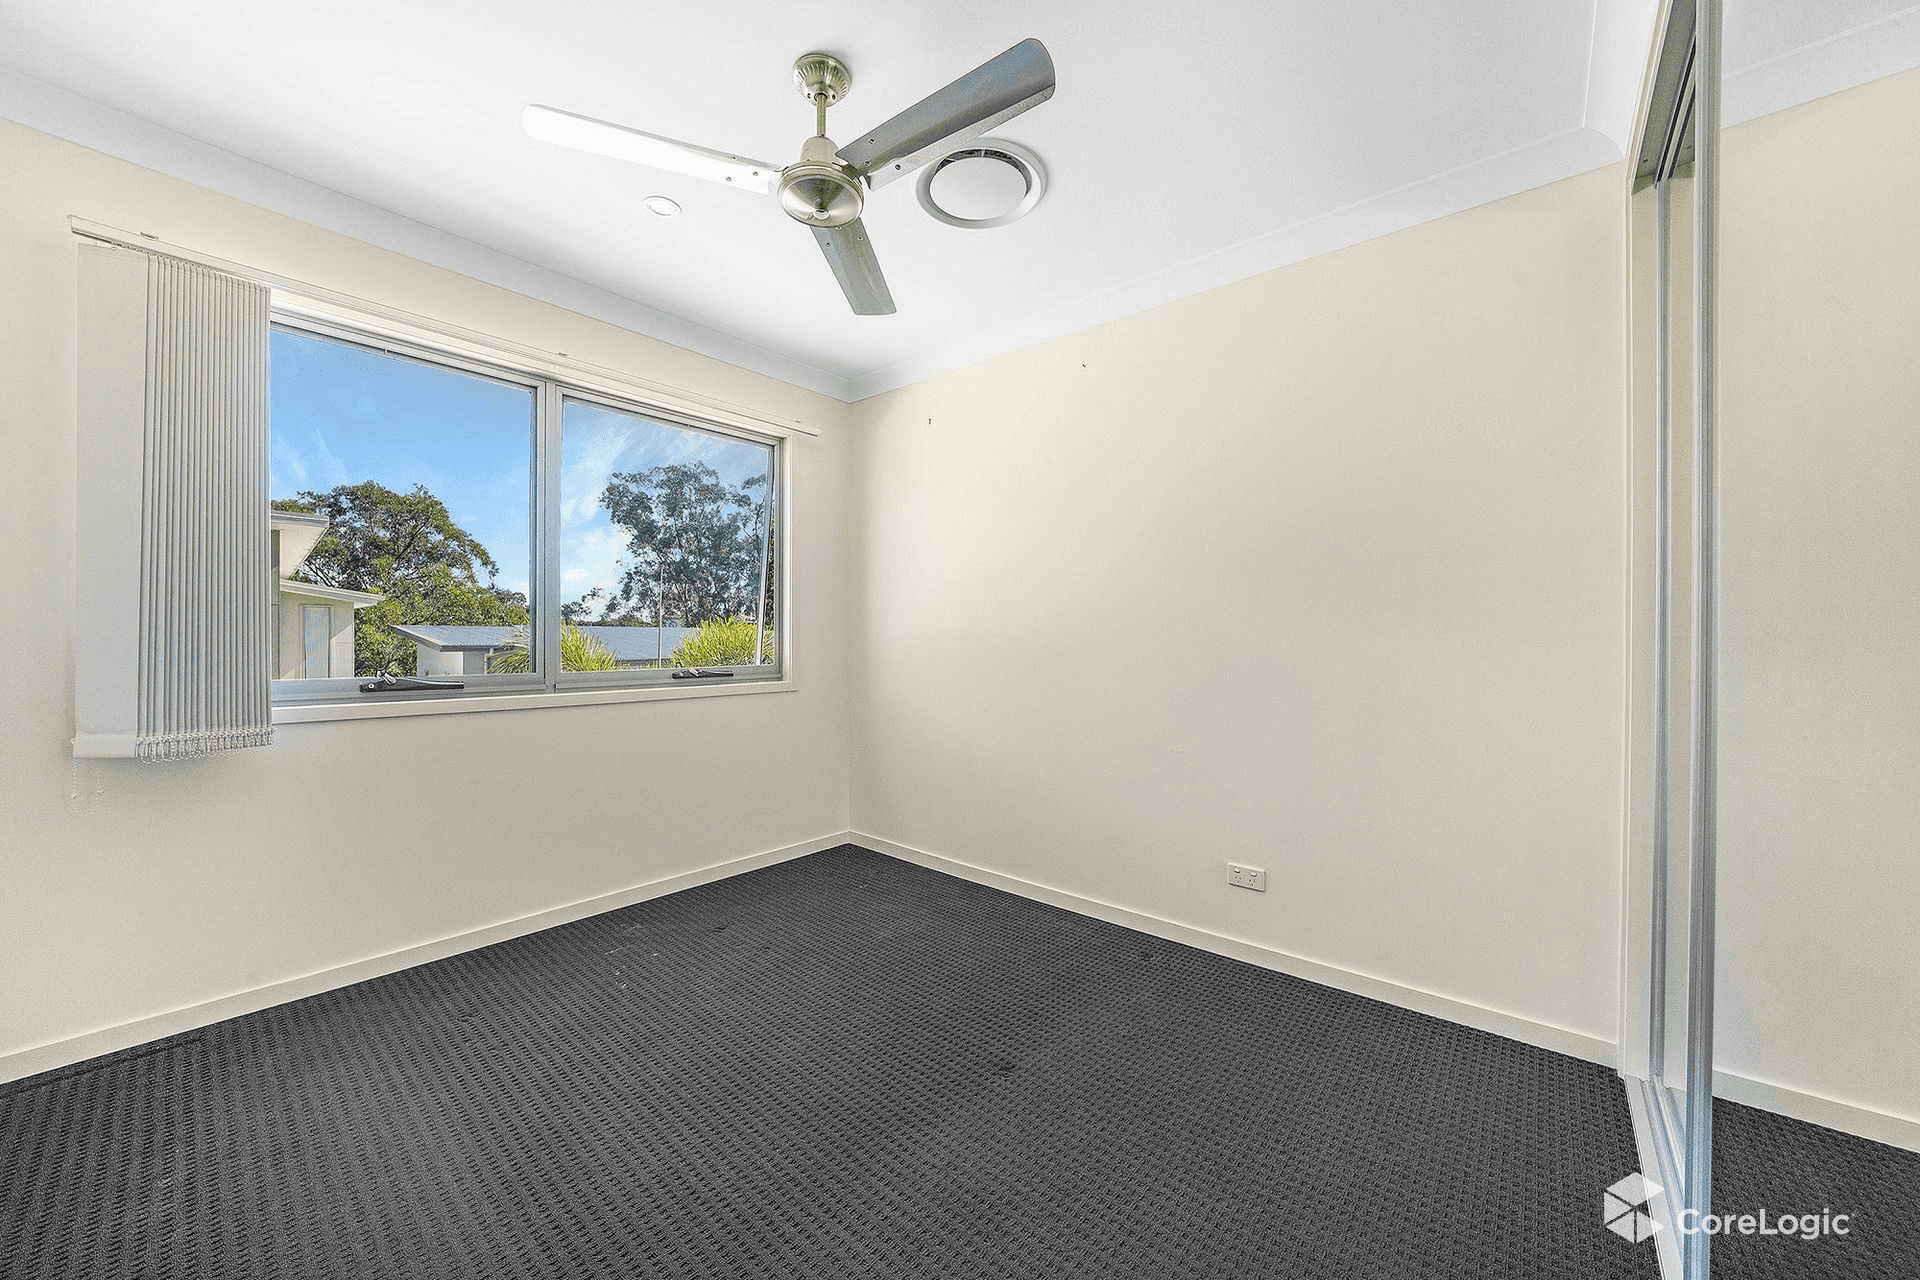 Unit 38/17 Great Southern Dr, Robina, QLD 4226